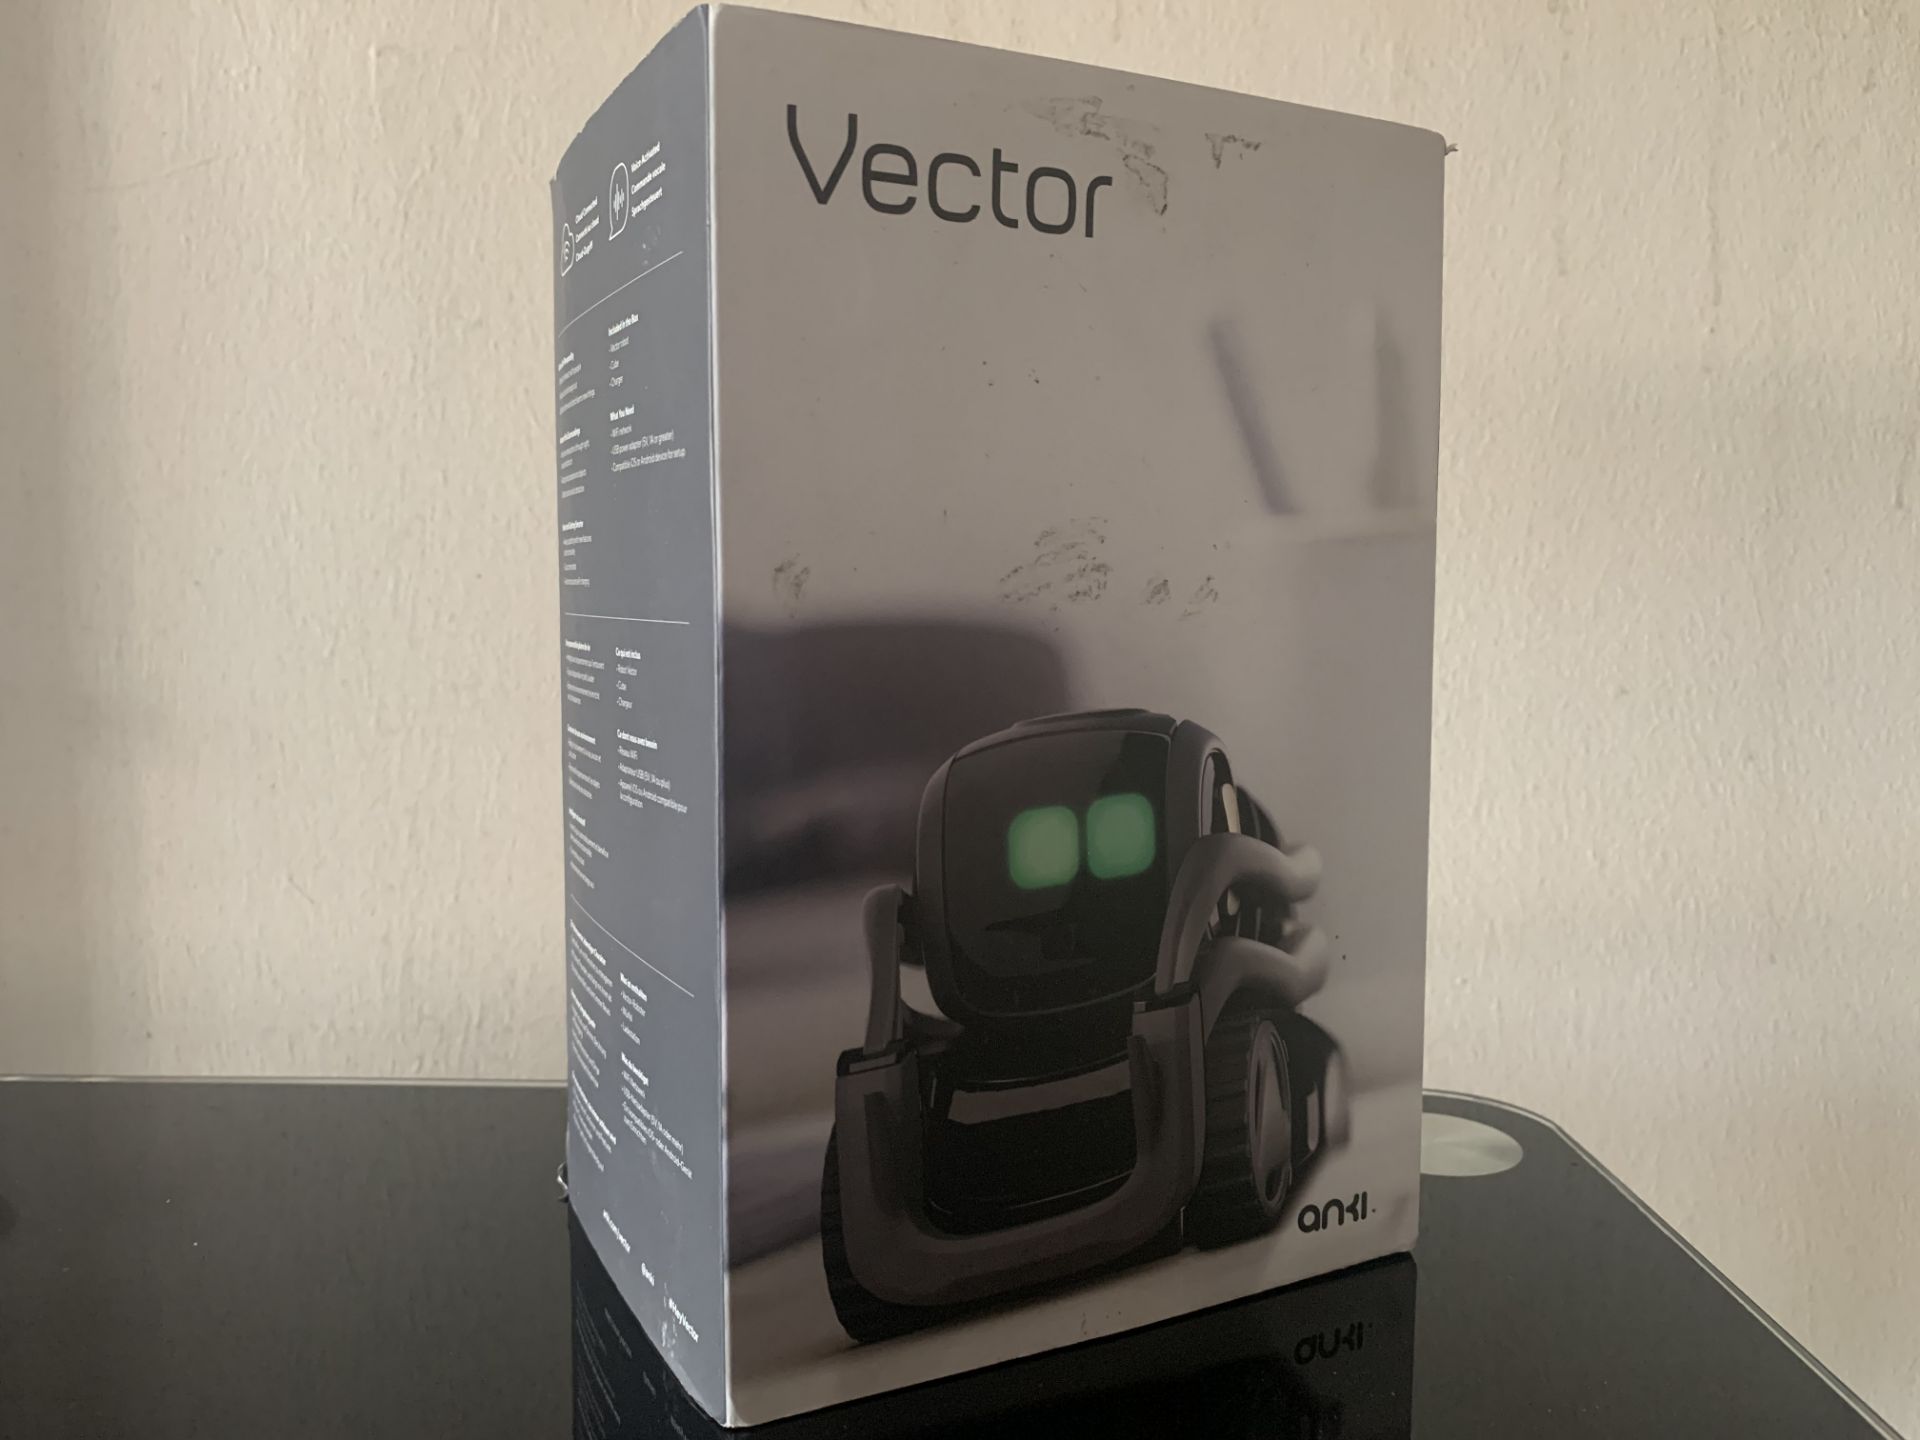 ANKI VECTOR HOME ROBOT ( PLEASE NOTE BOXES ARE DAMAGED )